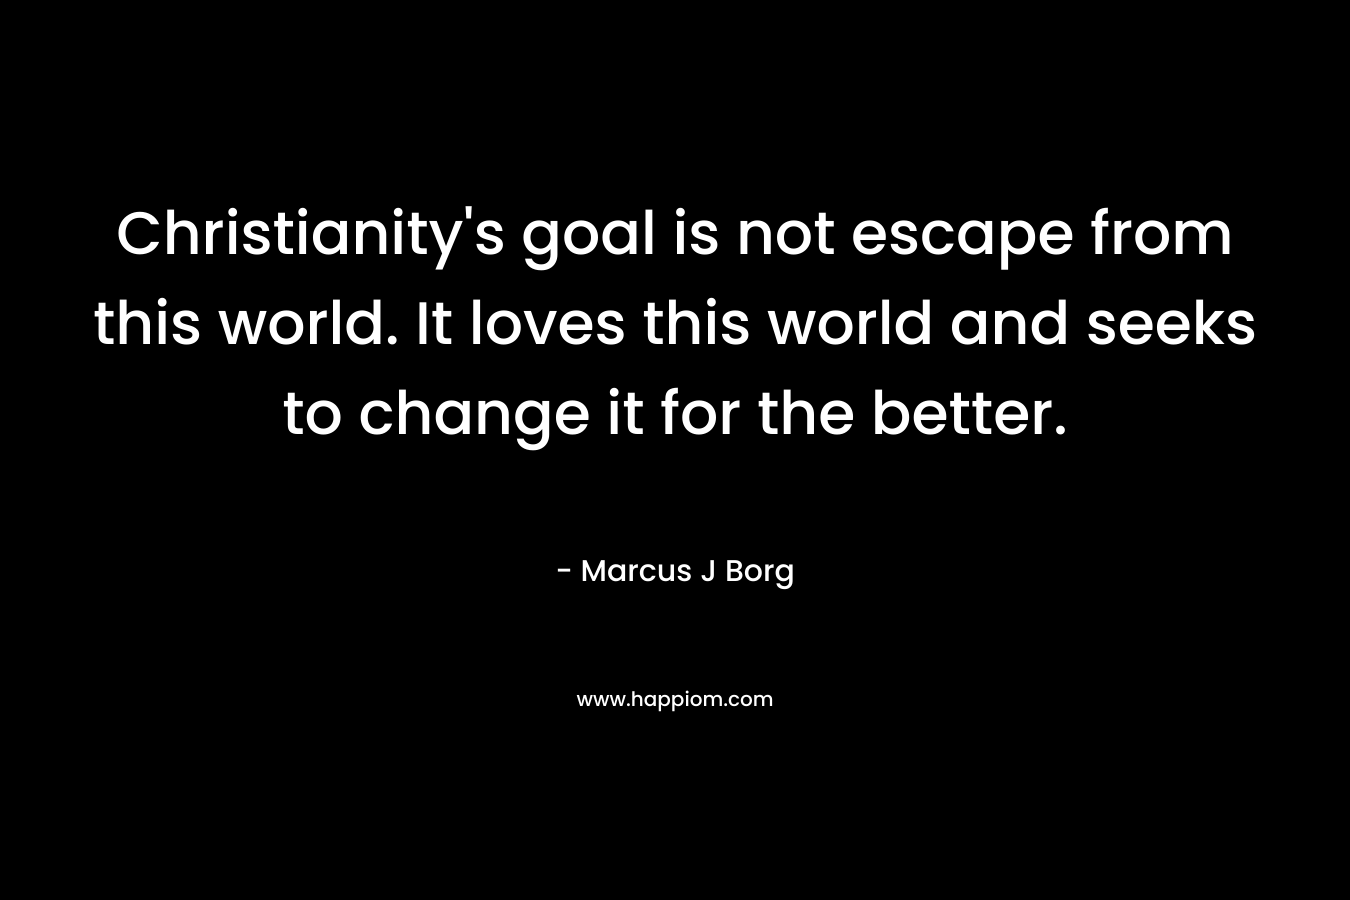 Christianity’s goal is not escape from this world. It loves this world and seeks to change it for the better. – Marcus J Borg